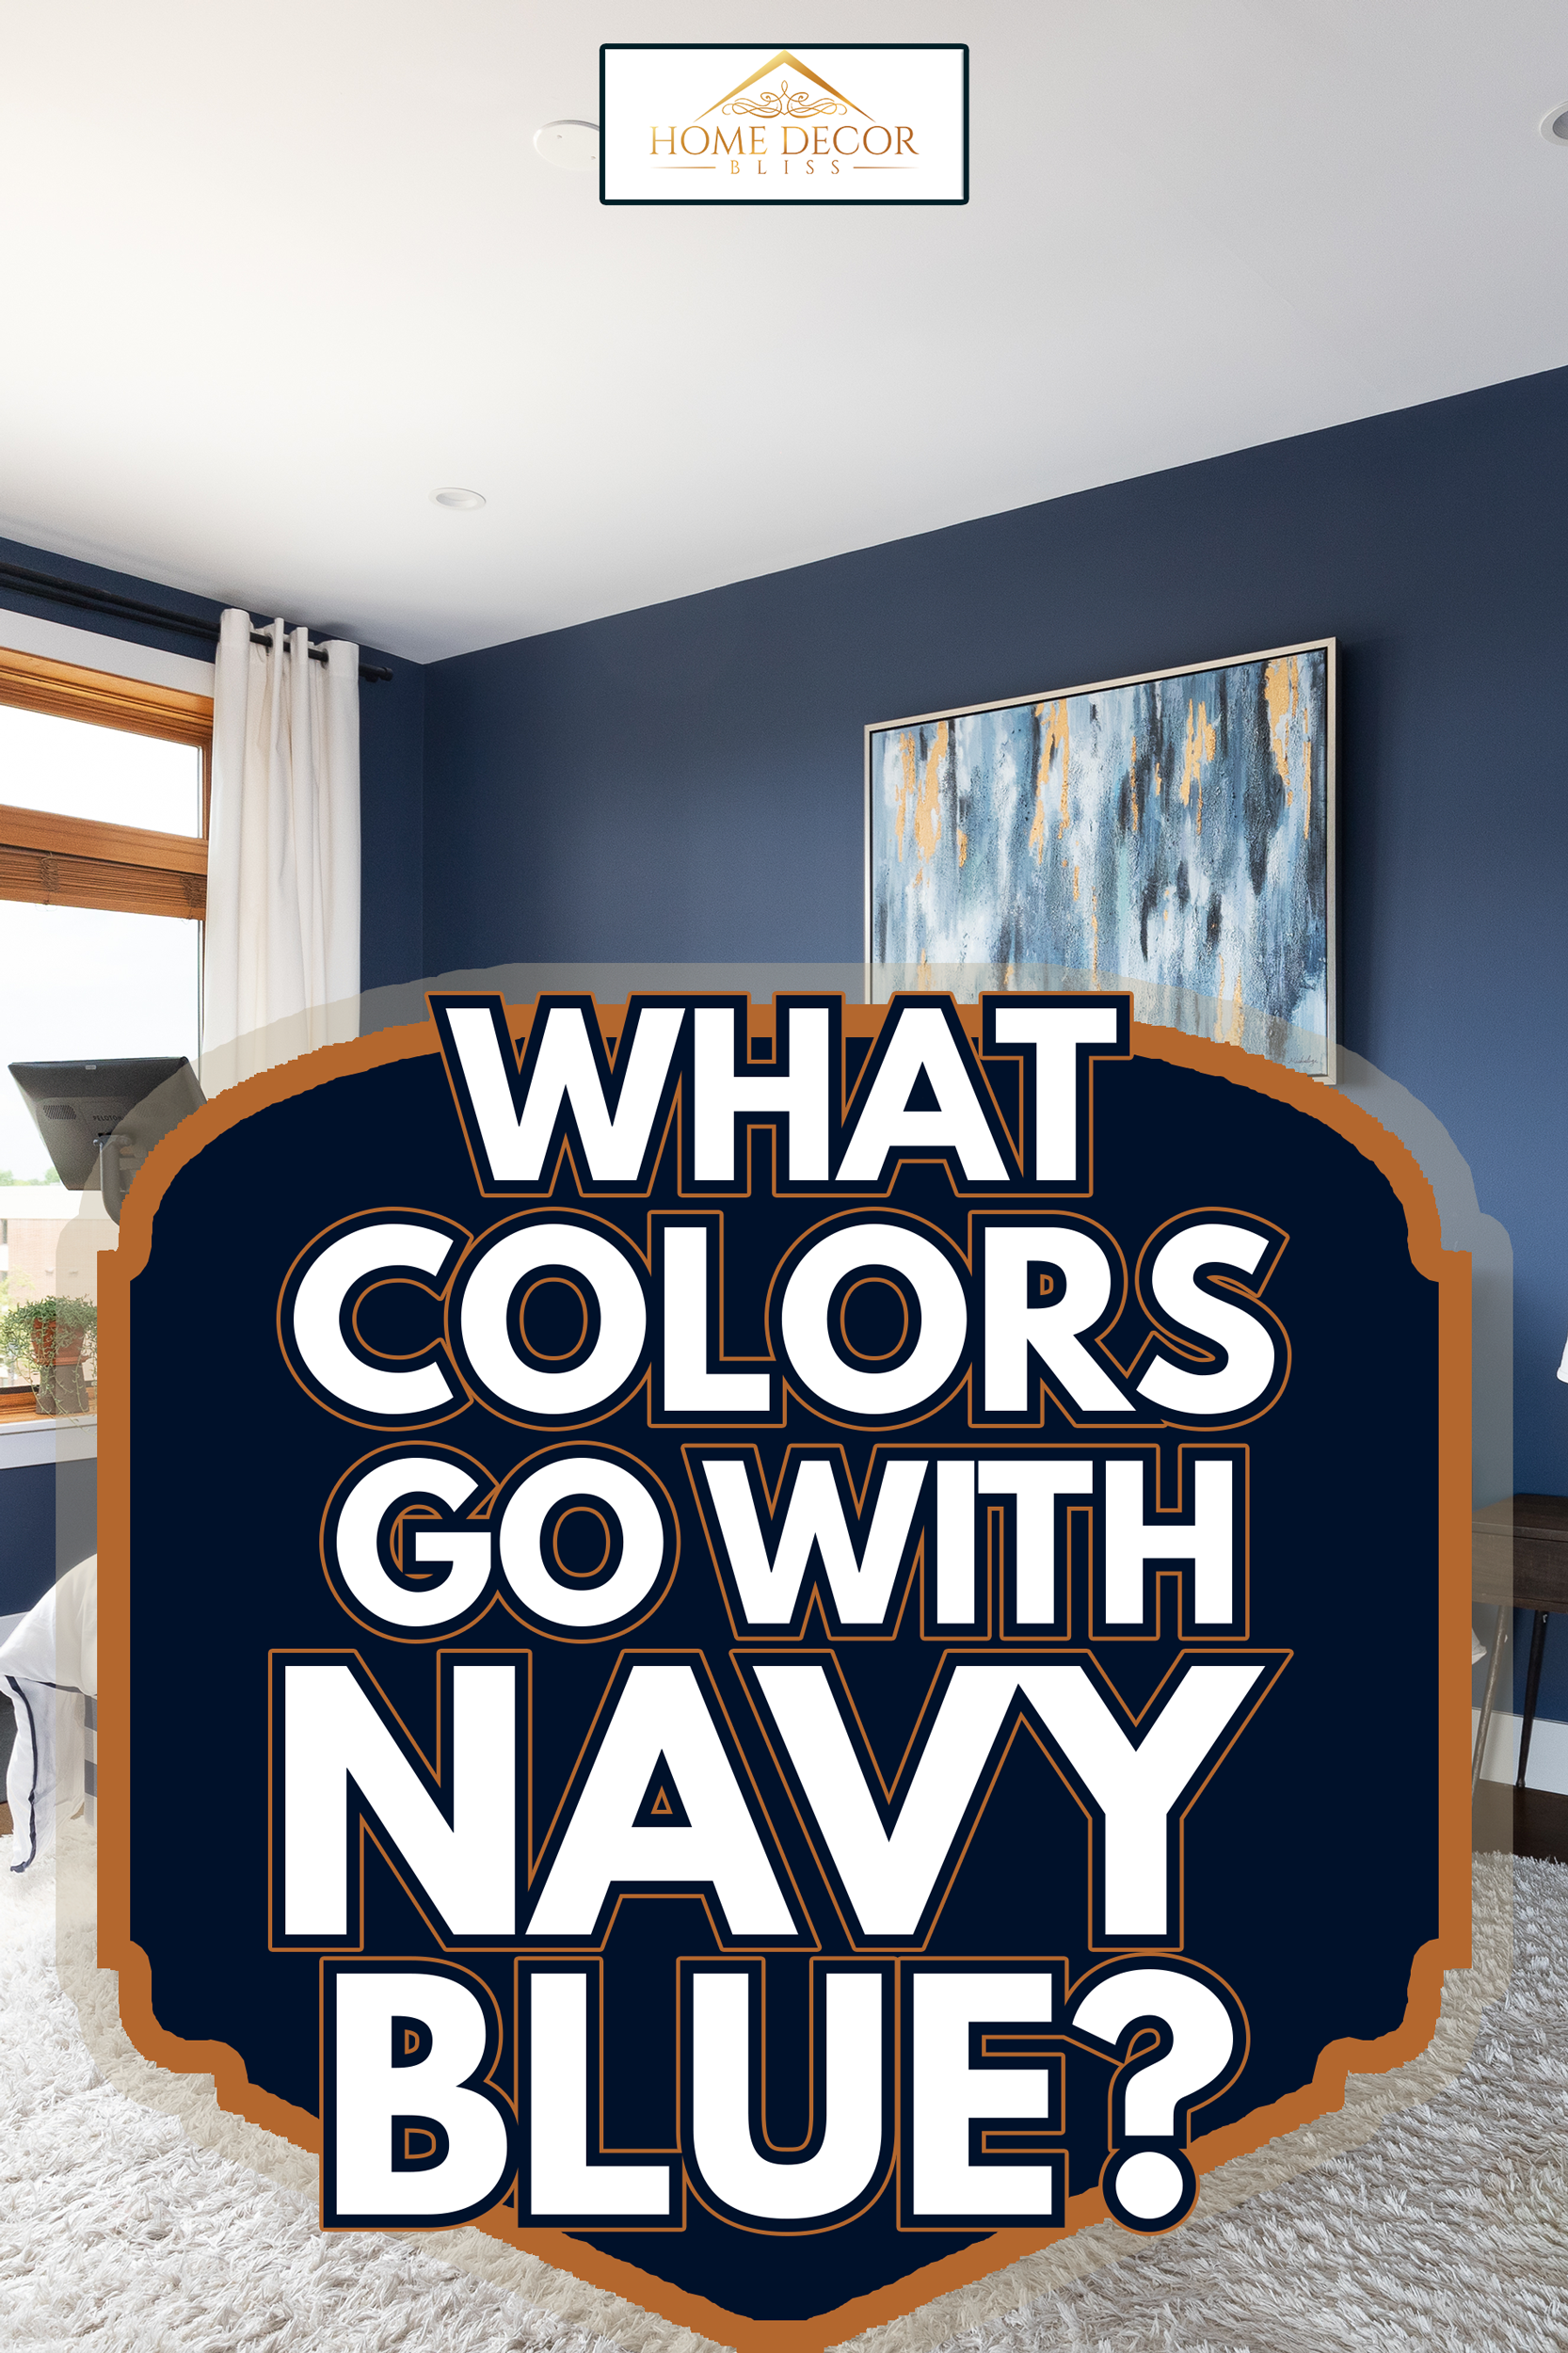 A navy blue bedroom with wood framed windows a bed sitting on a rug and hardwood floors, and a Peloton - What Colors Go With Navy Blue